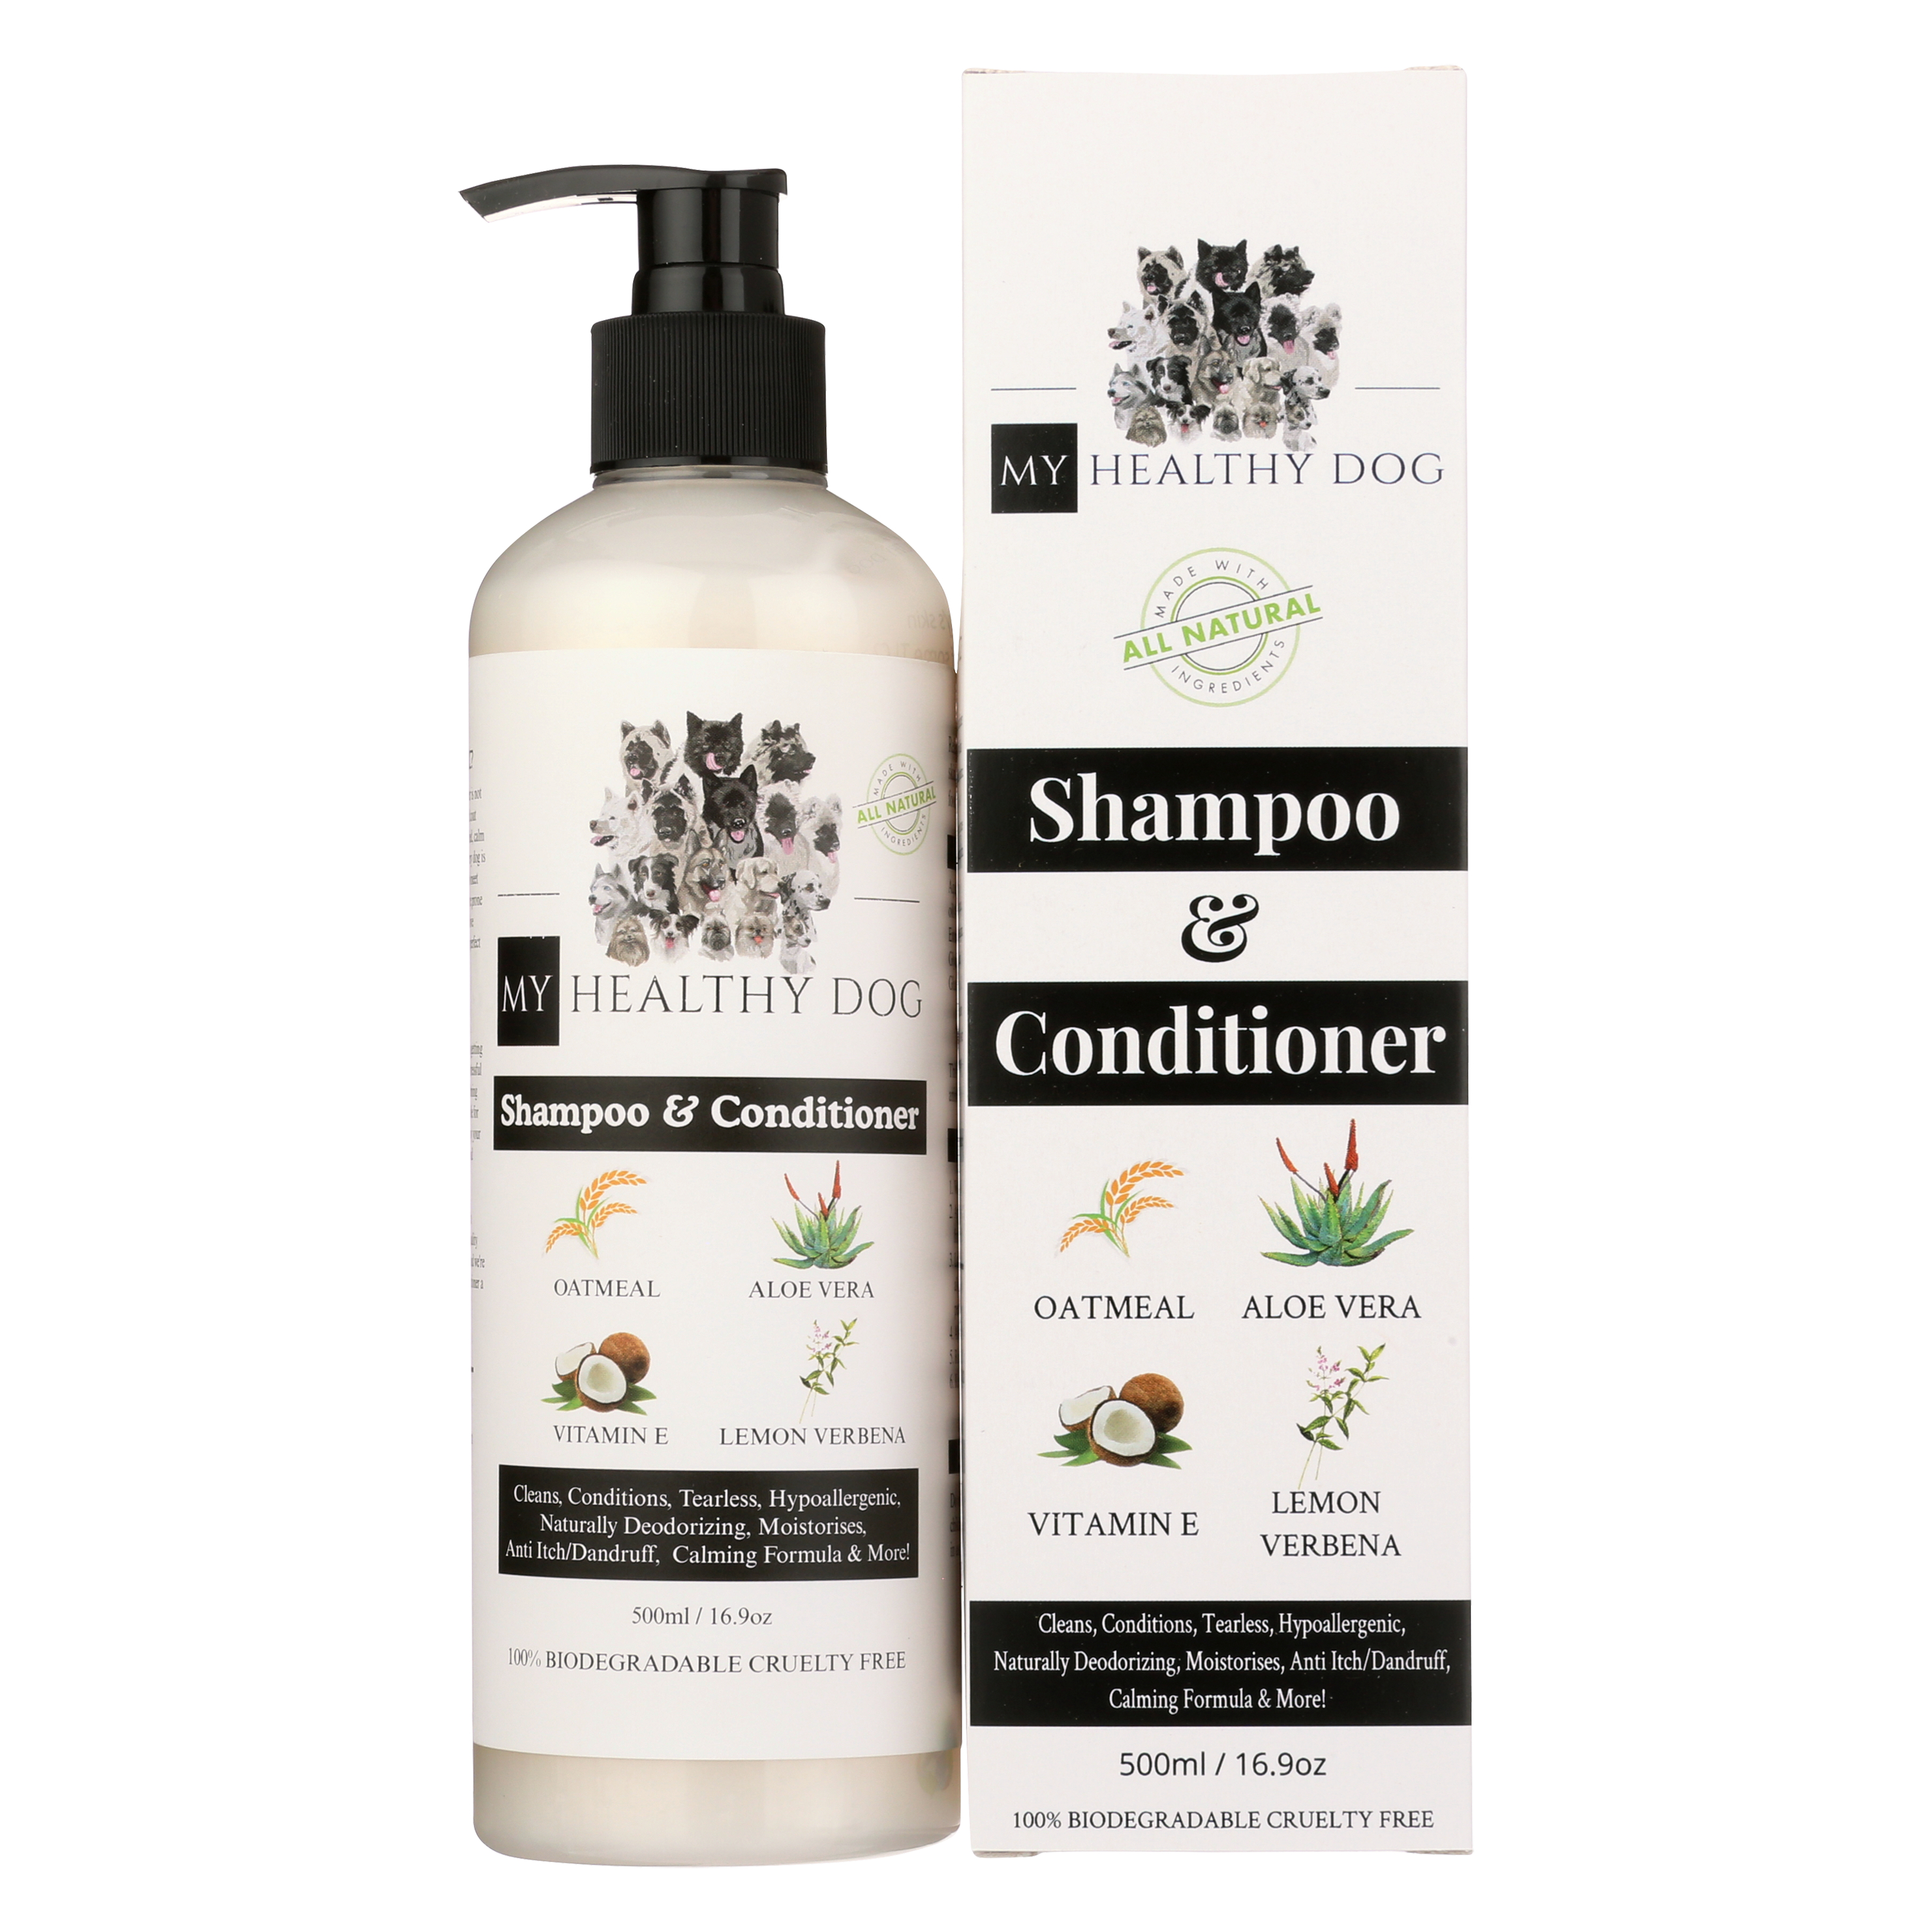 Perfect for all breeds and sizes, our shampoo helps tame the unruly fur, combats dryness, and reduces shedding. It's like a magic potion that transforms itchy, dry skin into a soft, supple texture and dull, matted fur into a vibrant, shiny coat.

Backed by trusted pet care science, our shampoo is free from harmful chemicals and harsh ingredients. It's pH-balanced for your dog's sensitive skin, hypoallergenic, and tear-free, ensuring an enjoyable bath time for your four-legged friend.